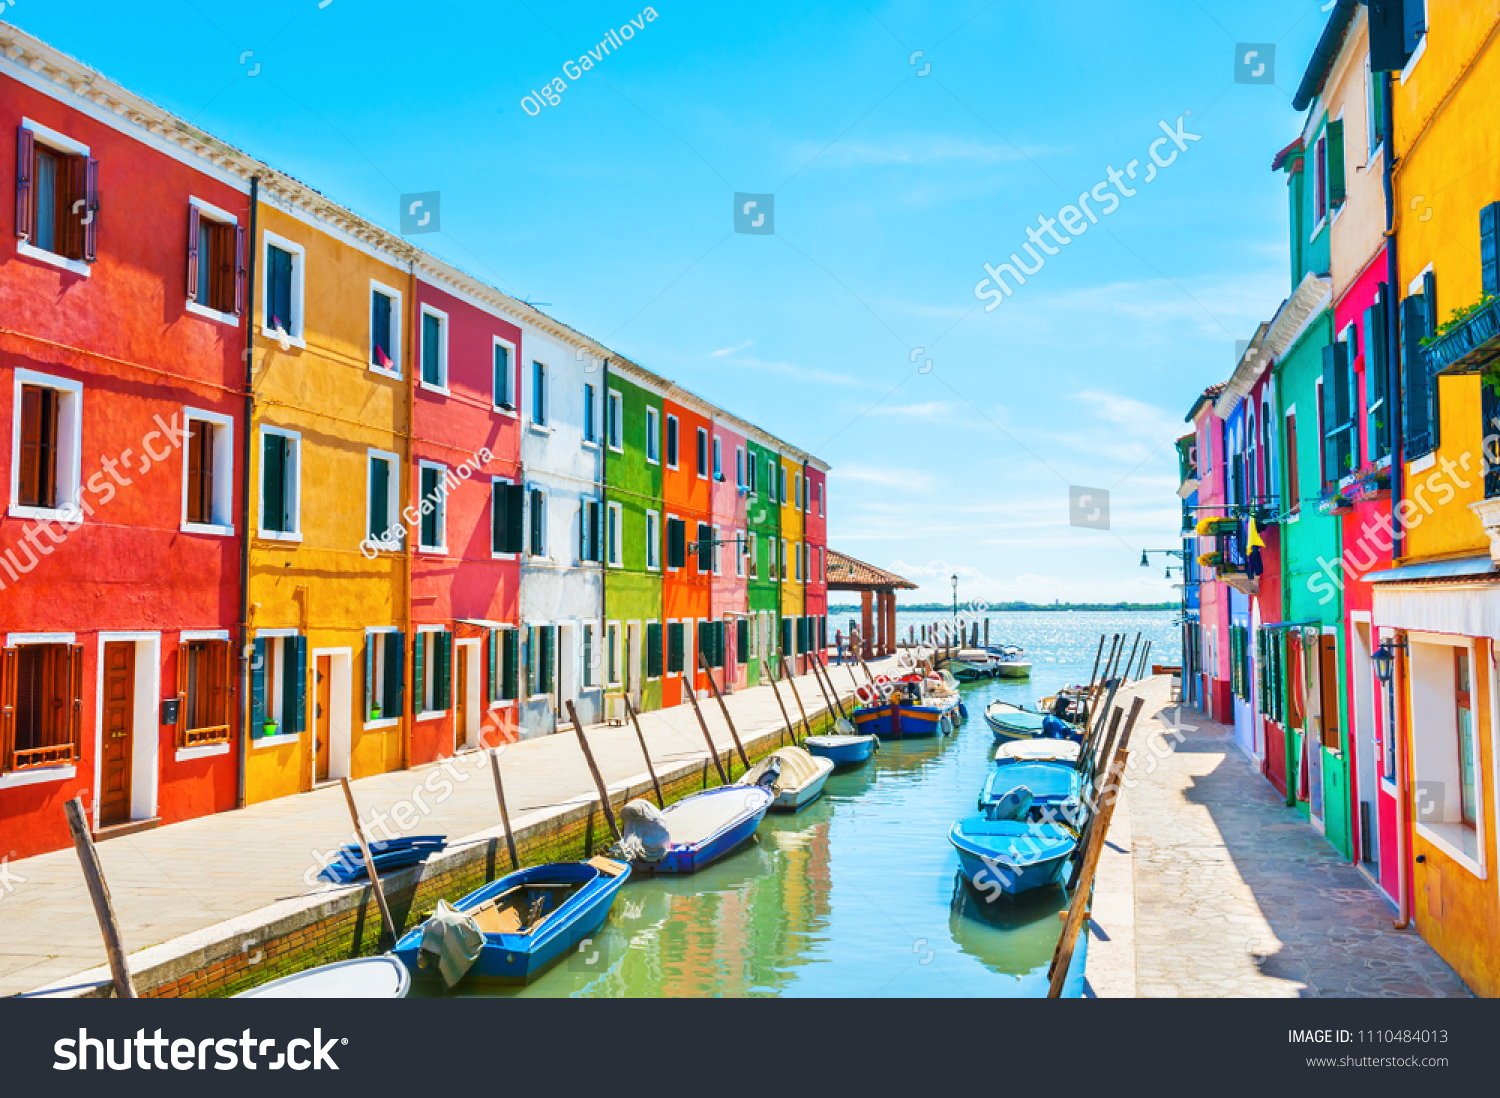 Scenic canal with colorful buildings in Burano island, Venice, Italy #1110484013